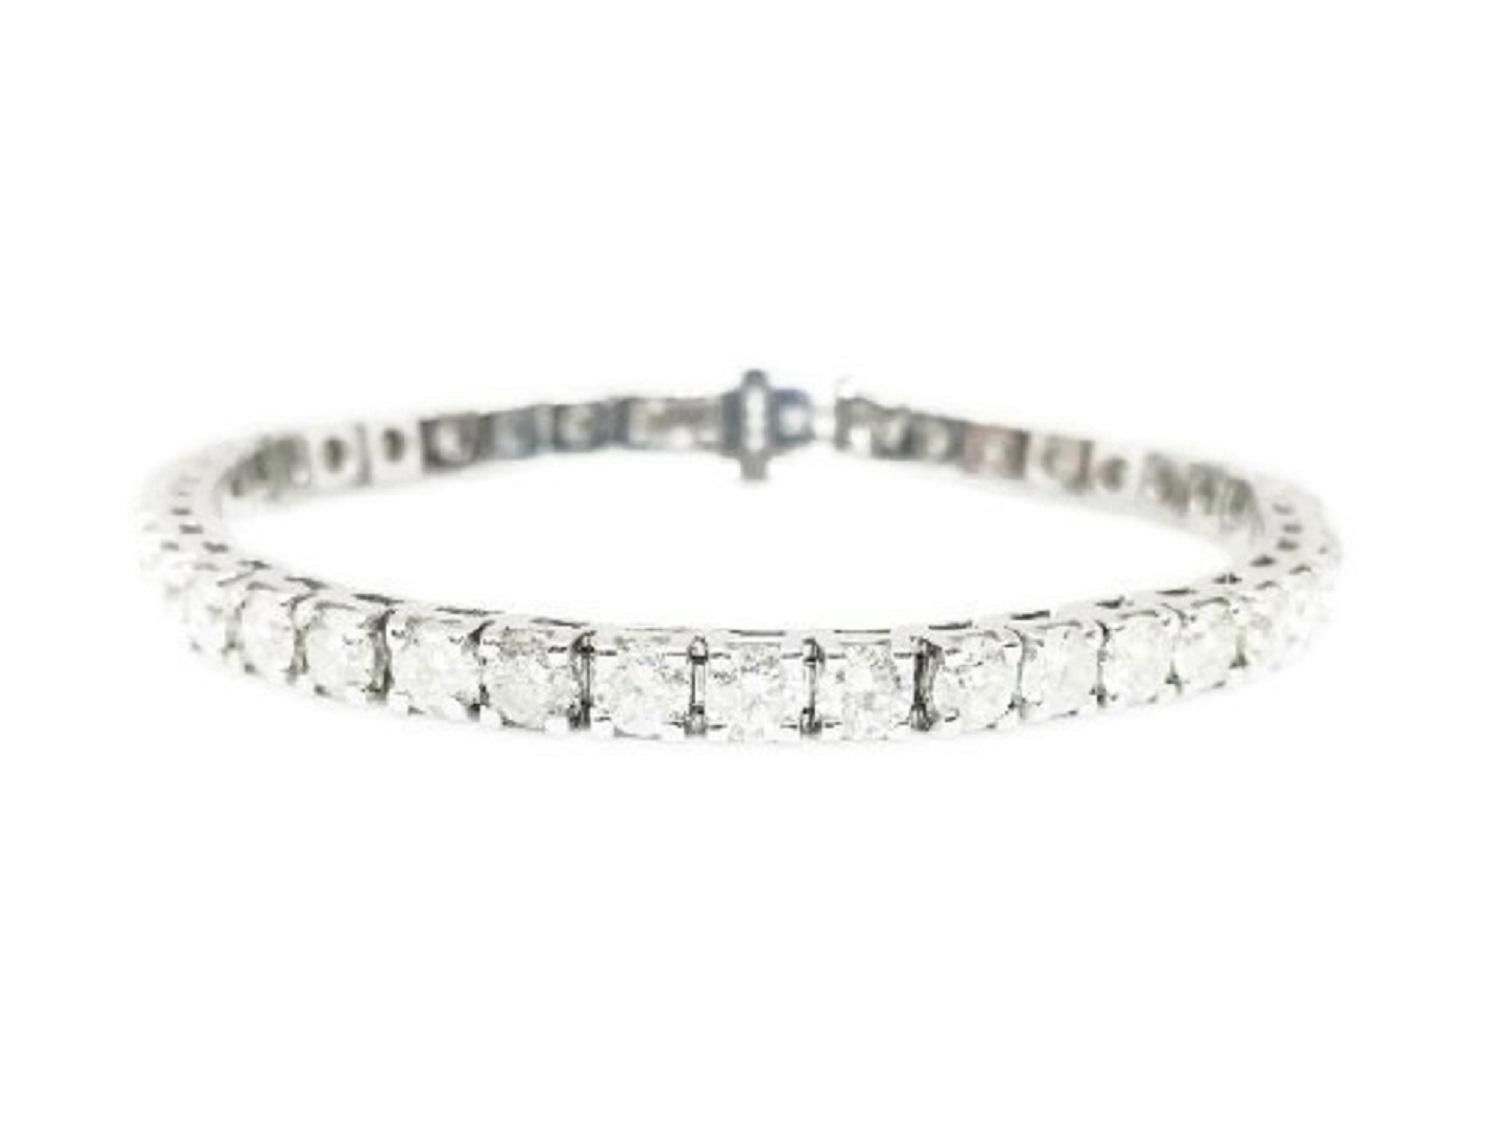 A quality tennis bracelet, 42 pcs of round-brilliant cut diamonds. set on 14k white gold. each stone is set in a classic four-prong style for maximum light brilliance. 7 inch length. Shiny and Eye clean, Color I, Clarity SI. 